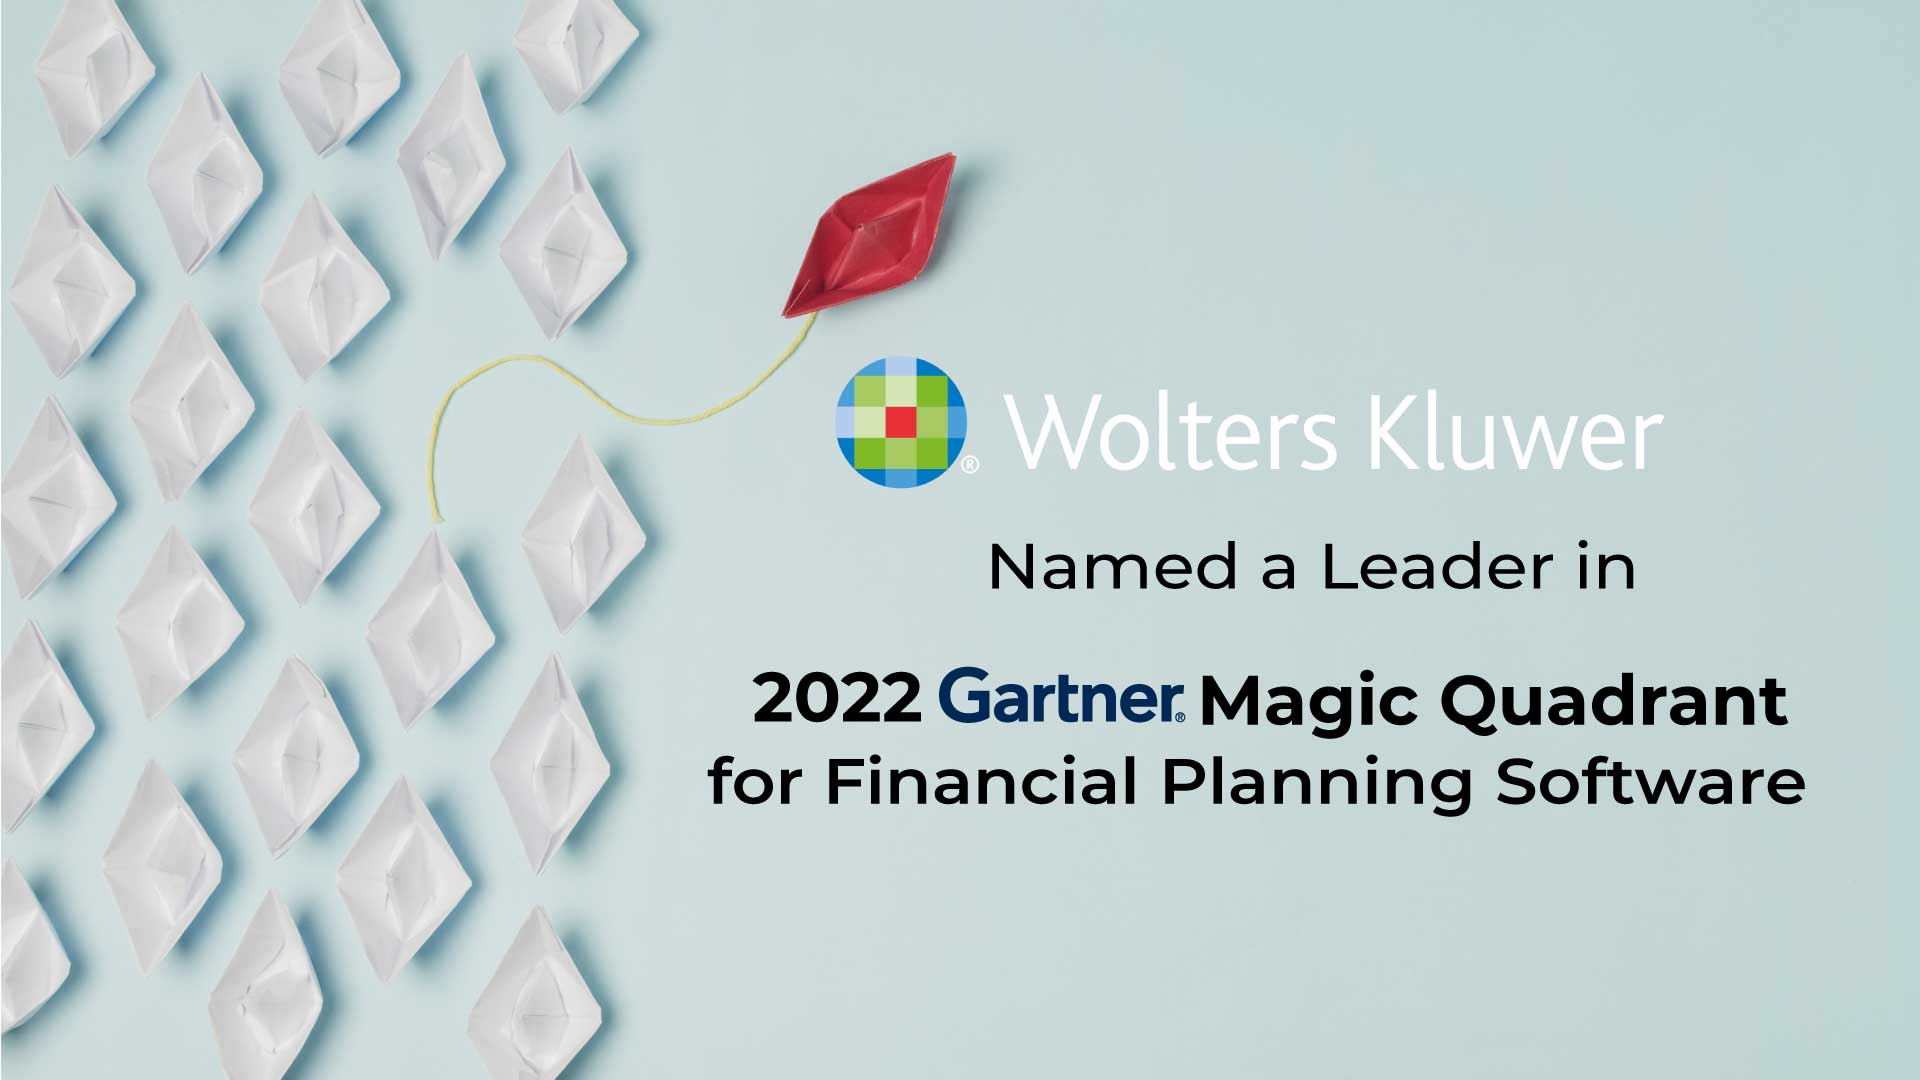 Wolters Kluwer Recognized as a Leader in 2022 Gartner® Magic Quadrant™ for Financial Planning Software